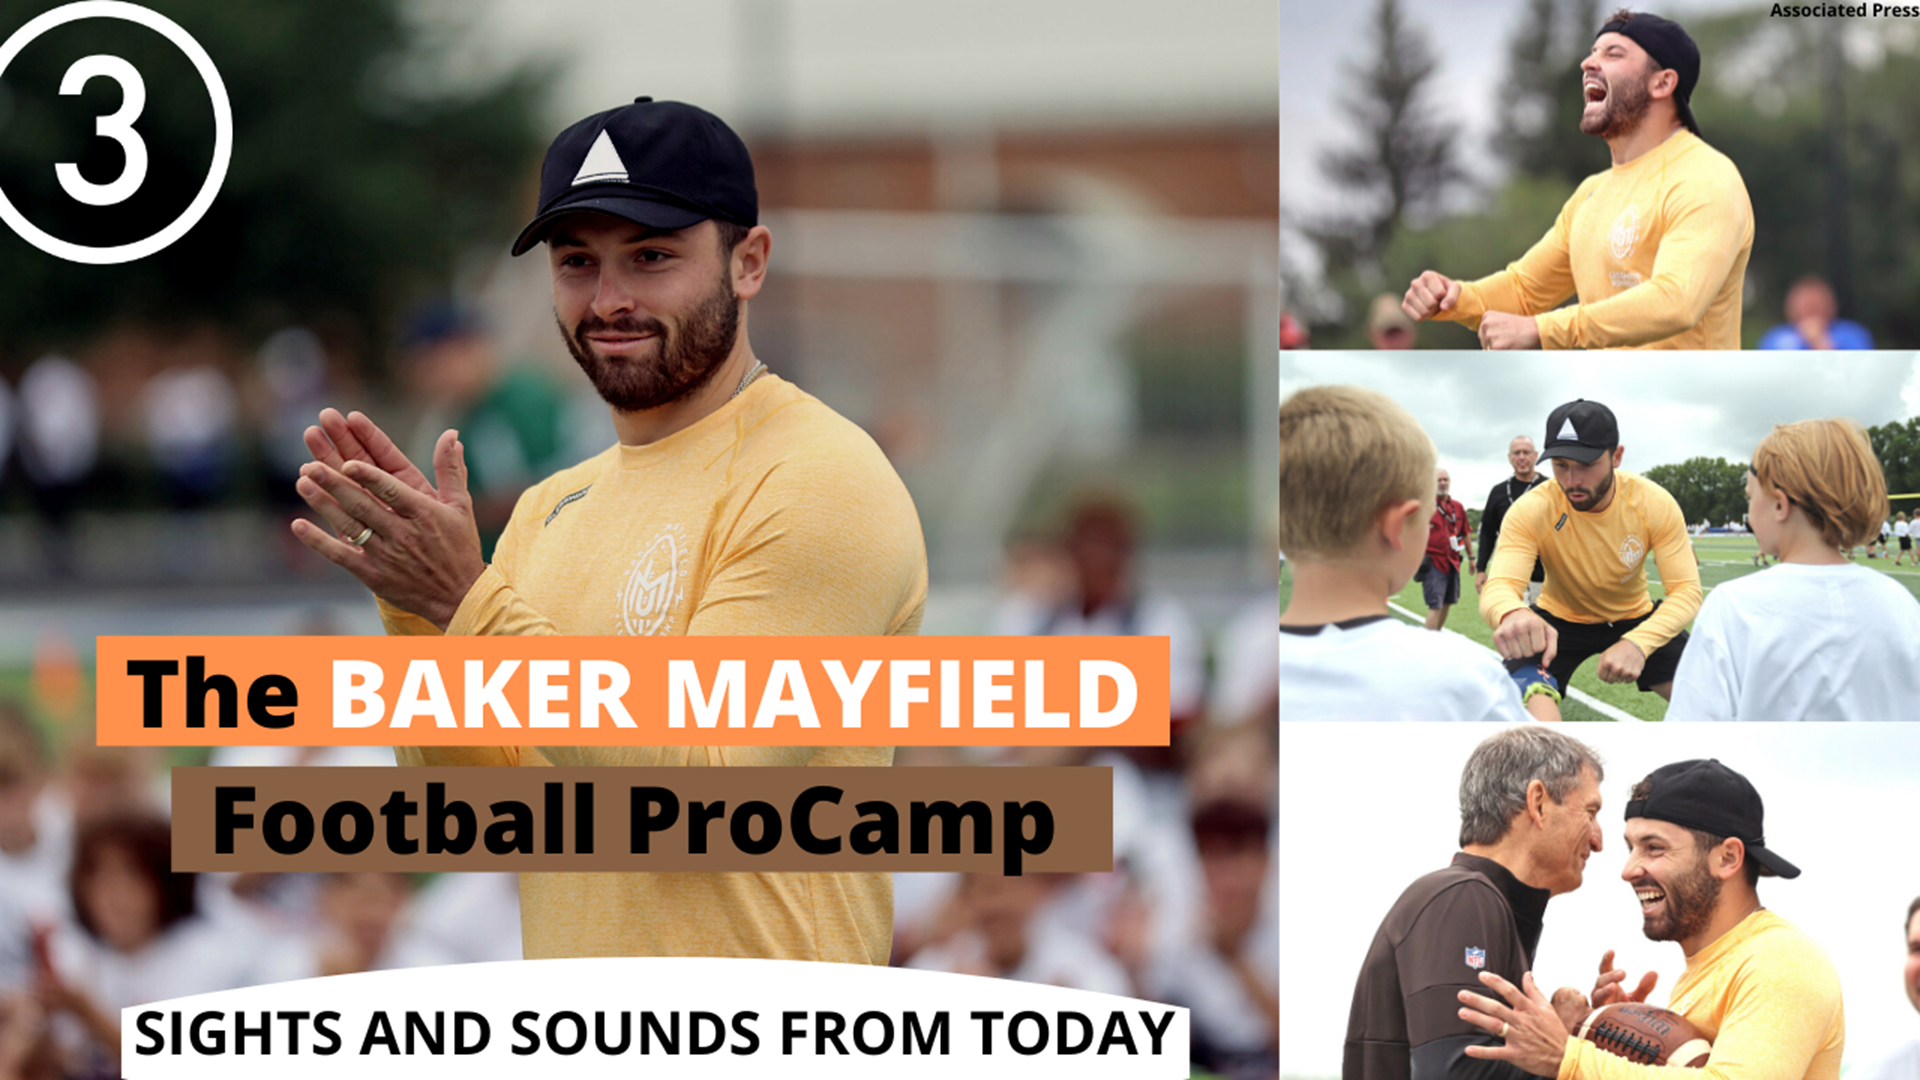 Cleveland Browns' QB Baker Mayfield hosted his annual youth football camp on Wednesday.